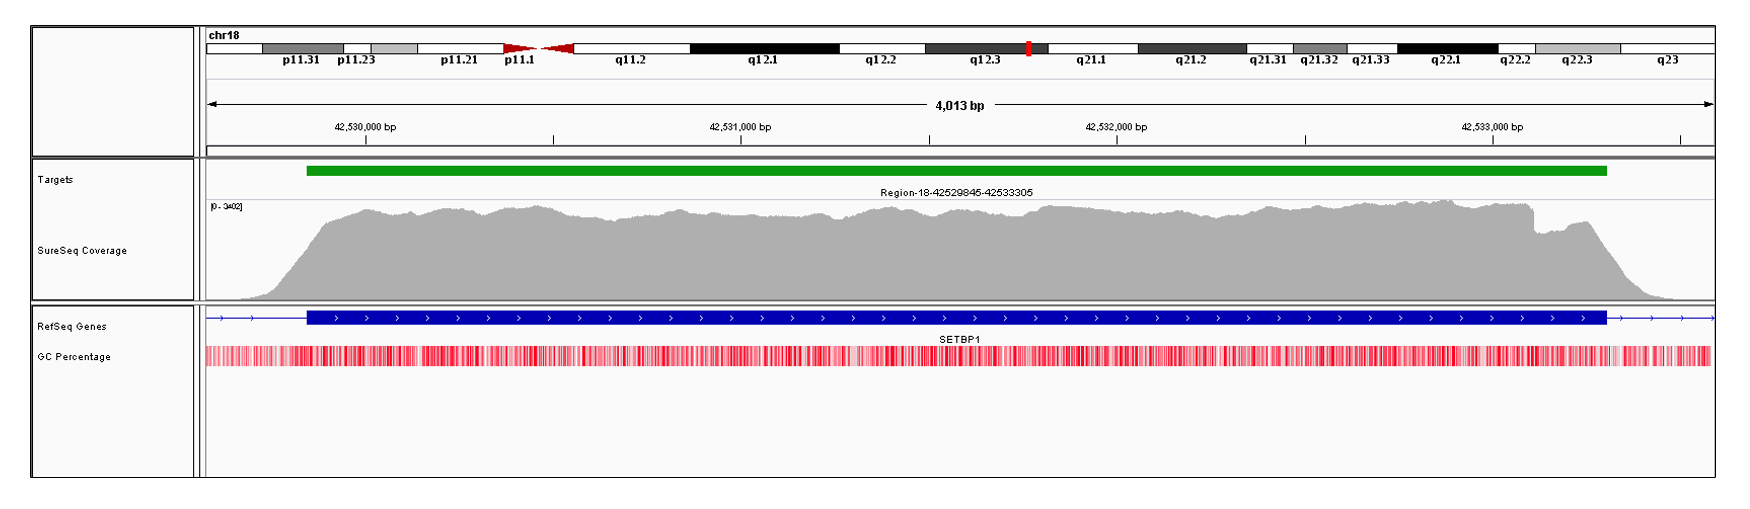 SETBP1 Exon 4 (hg19 chr18:42529846-42533305). Depth of coverage per base (grey). Targeted region (green). Gene coding region as defined by RefSeq (blue). GC percentage (red). Image